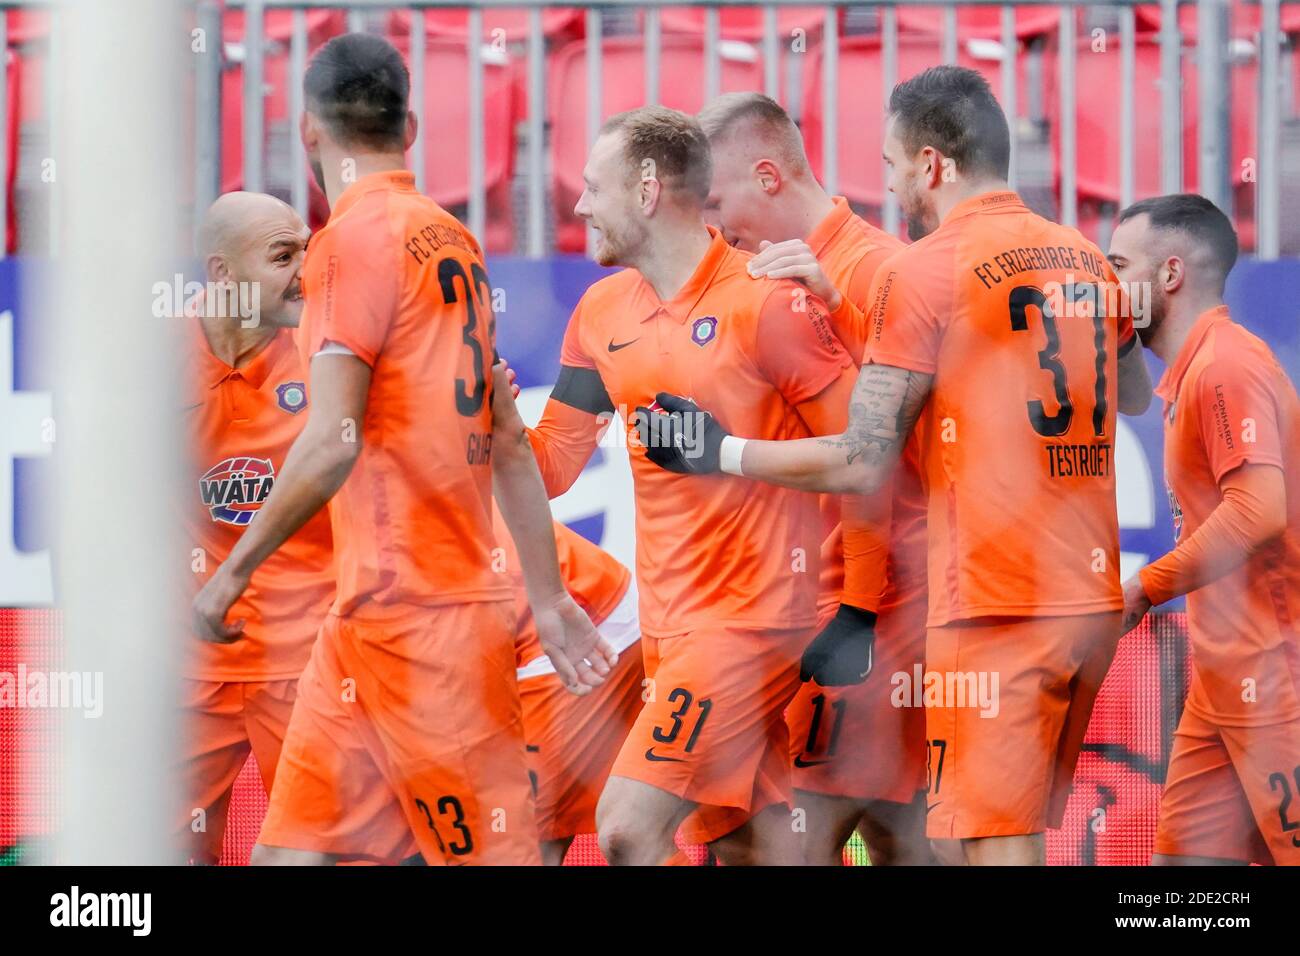 Sandhausen, Germany. 28th Nov, 2020. Football: 2nd Bundesliga, SV Sandhausen - FC Erzgebirge Aue, 9th matchday, Hardtwaldstadion. Goal scorer Ben Zolinski (M) from Erzgebirge Aue cheers with teammates about the goal for the 1:2. Credit: Uwe Anspach/dpa - IMPORTANT NOTE: In accordance with the regulations of the DFL Deutsche Fußball Liga and the DFB Deutscher Fußball-Bund, it is prohibited to exploit or have exploited in the stadium and/or from the game taken photographs in the form of sequence images and/or video-like photo series./dpa/Alamy Live News Stock Photo